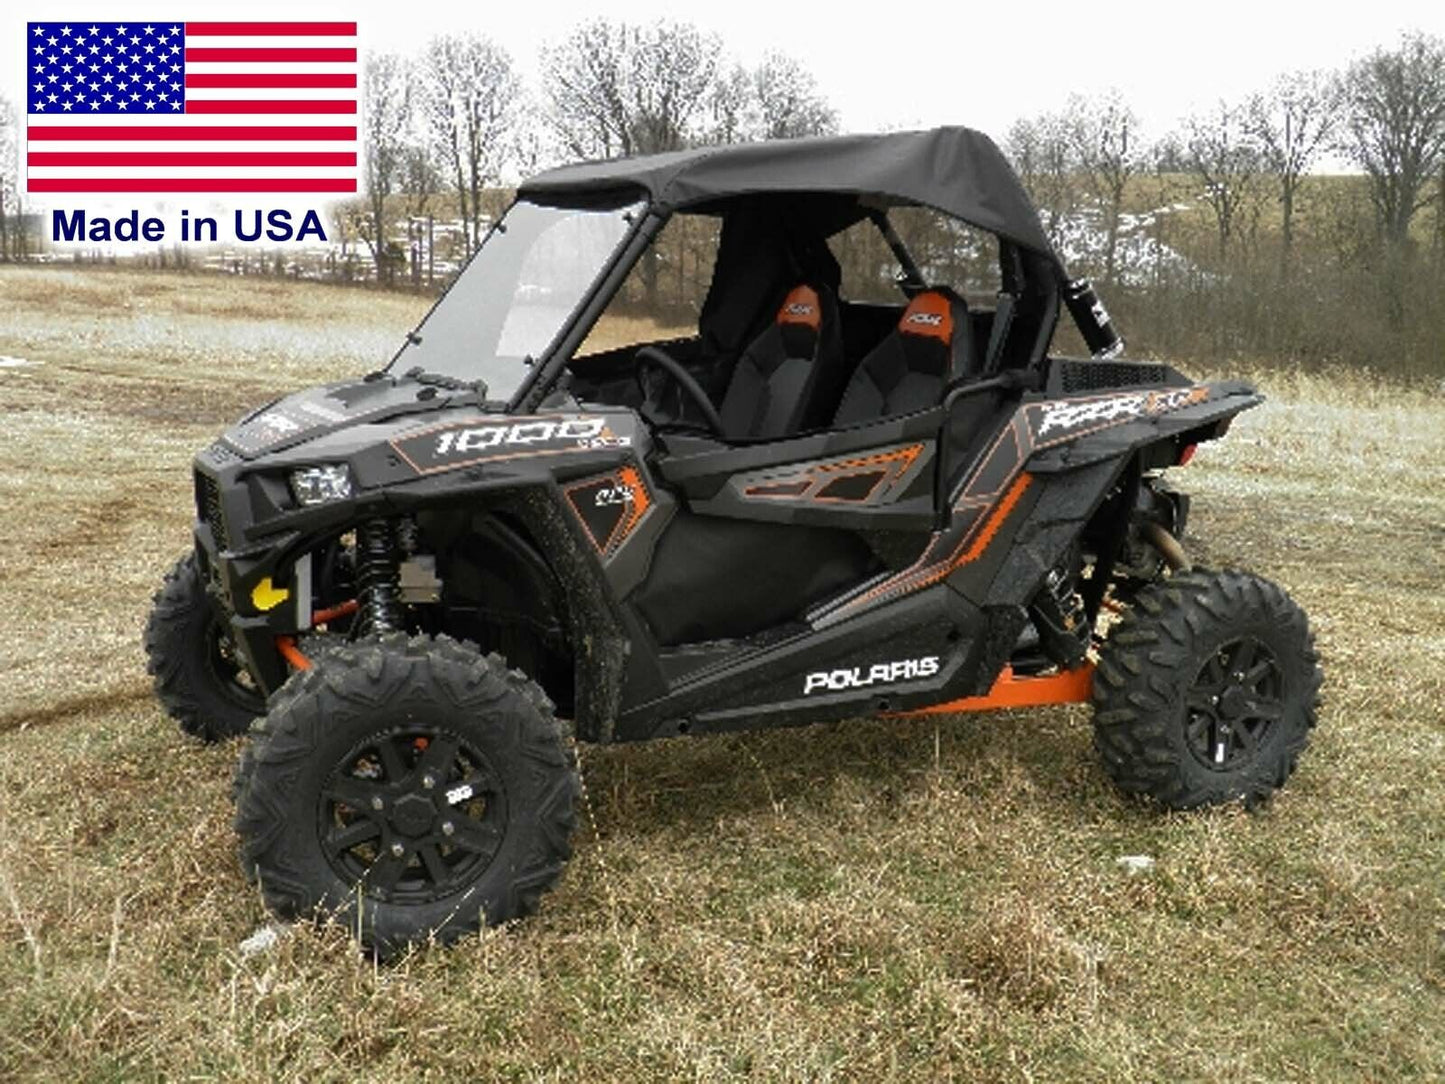 Hard Windshield and Roof for POLARIS RZR 1000 - Withstands Highway Speeds